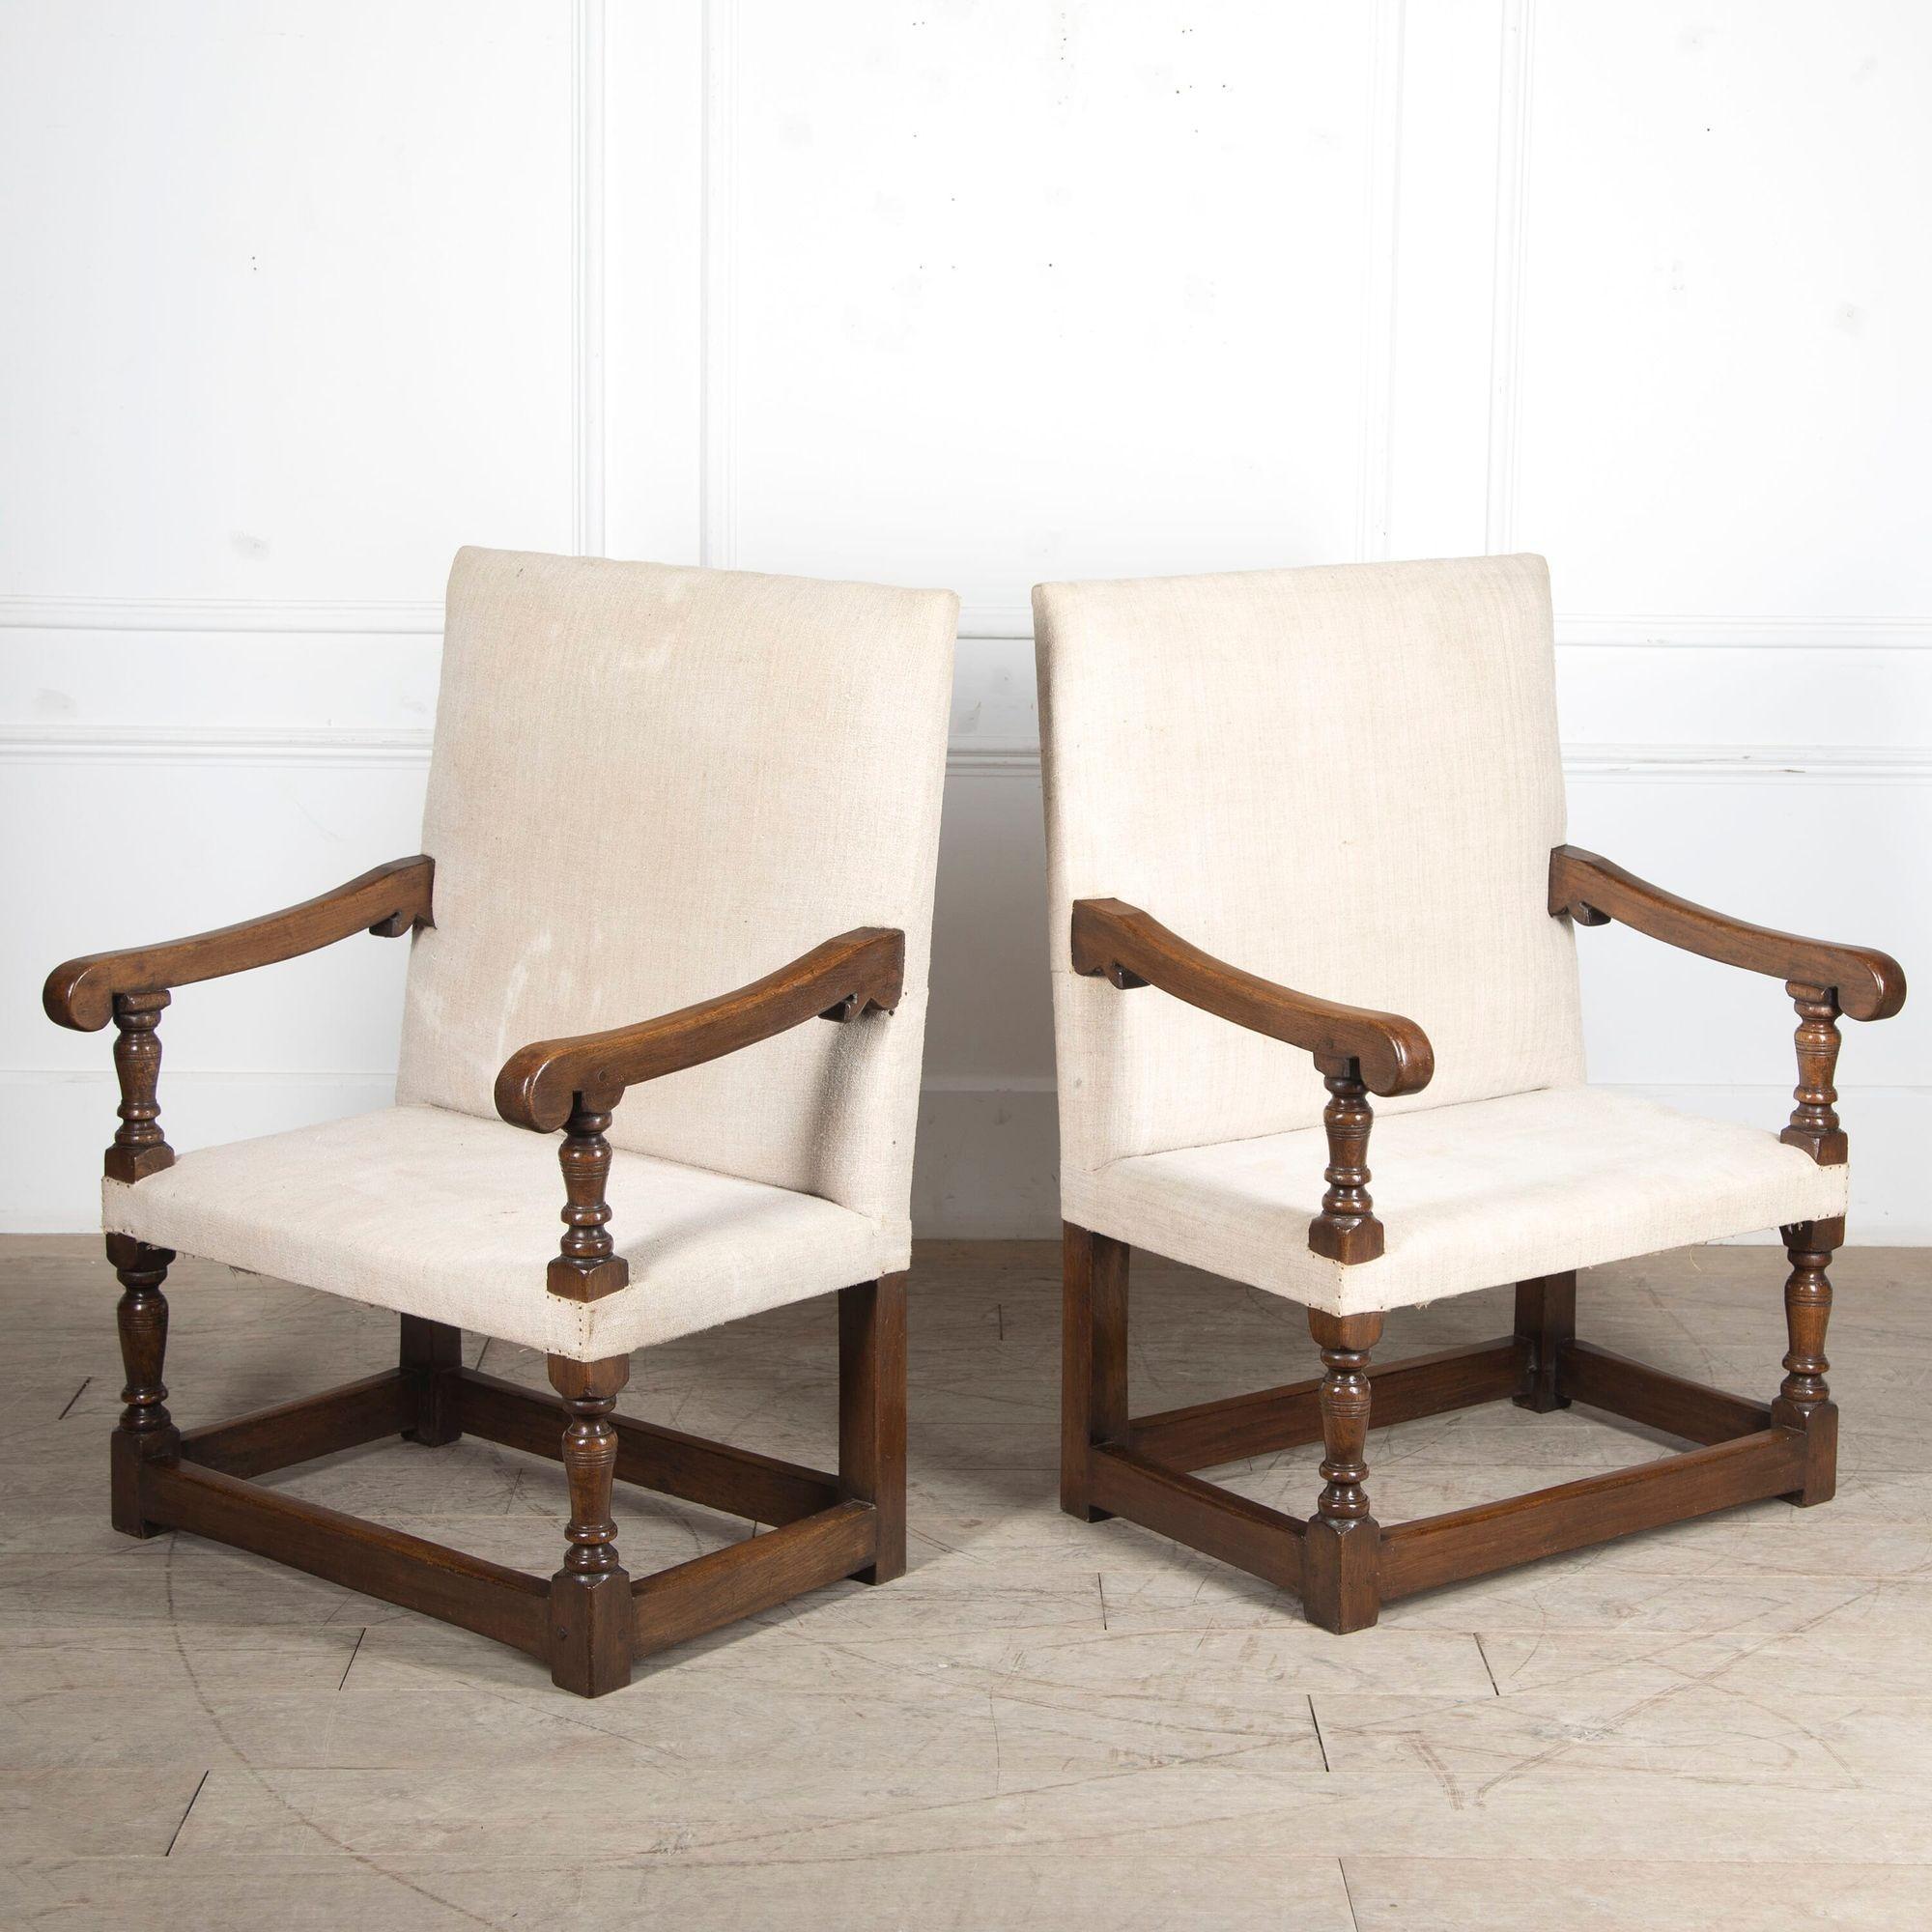 Upholstery Pair of Arts and Crafts Farthingale Chairs